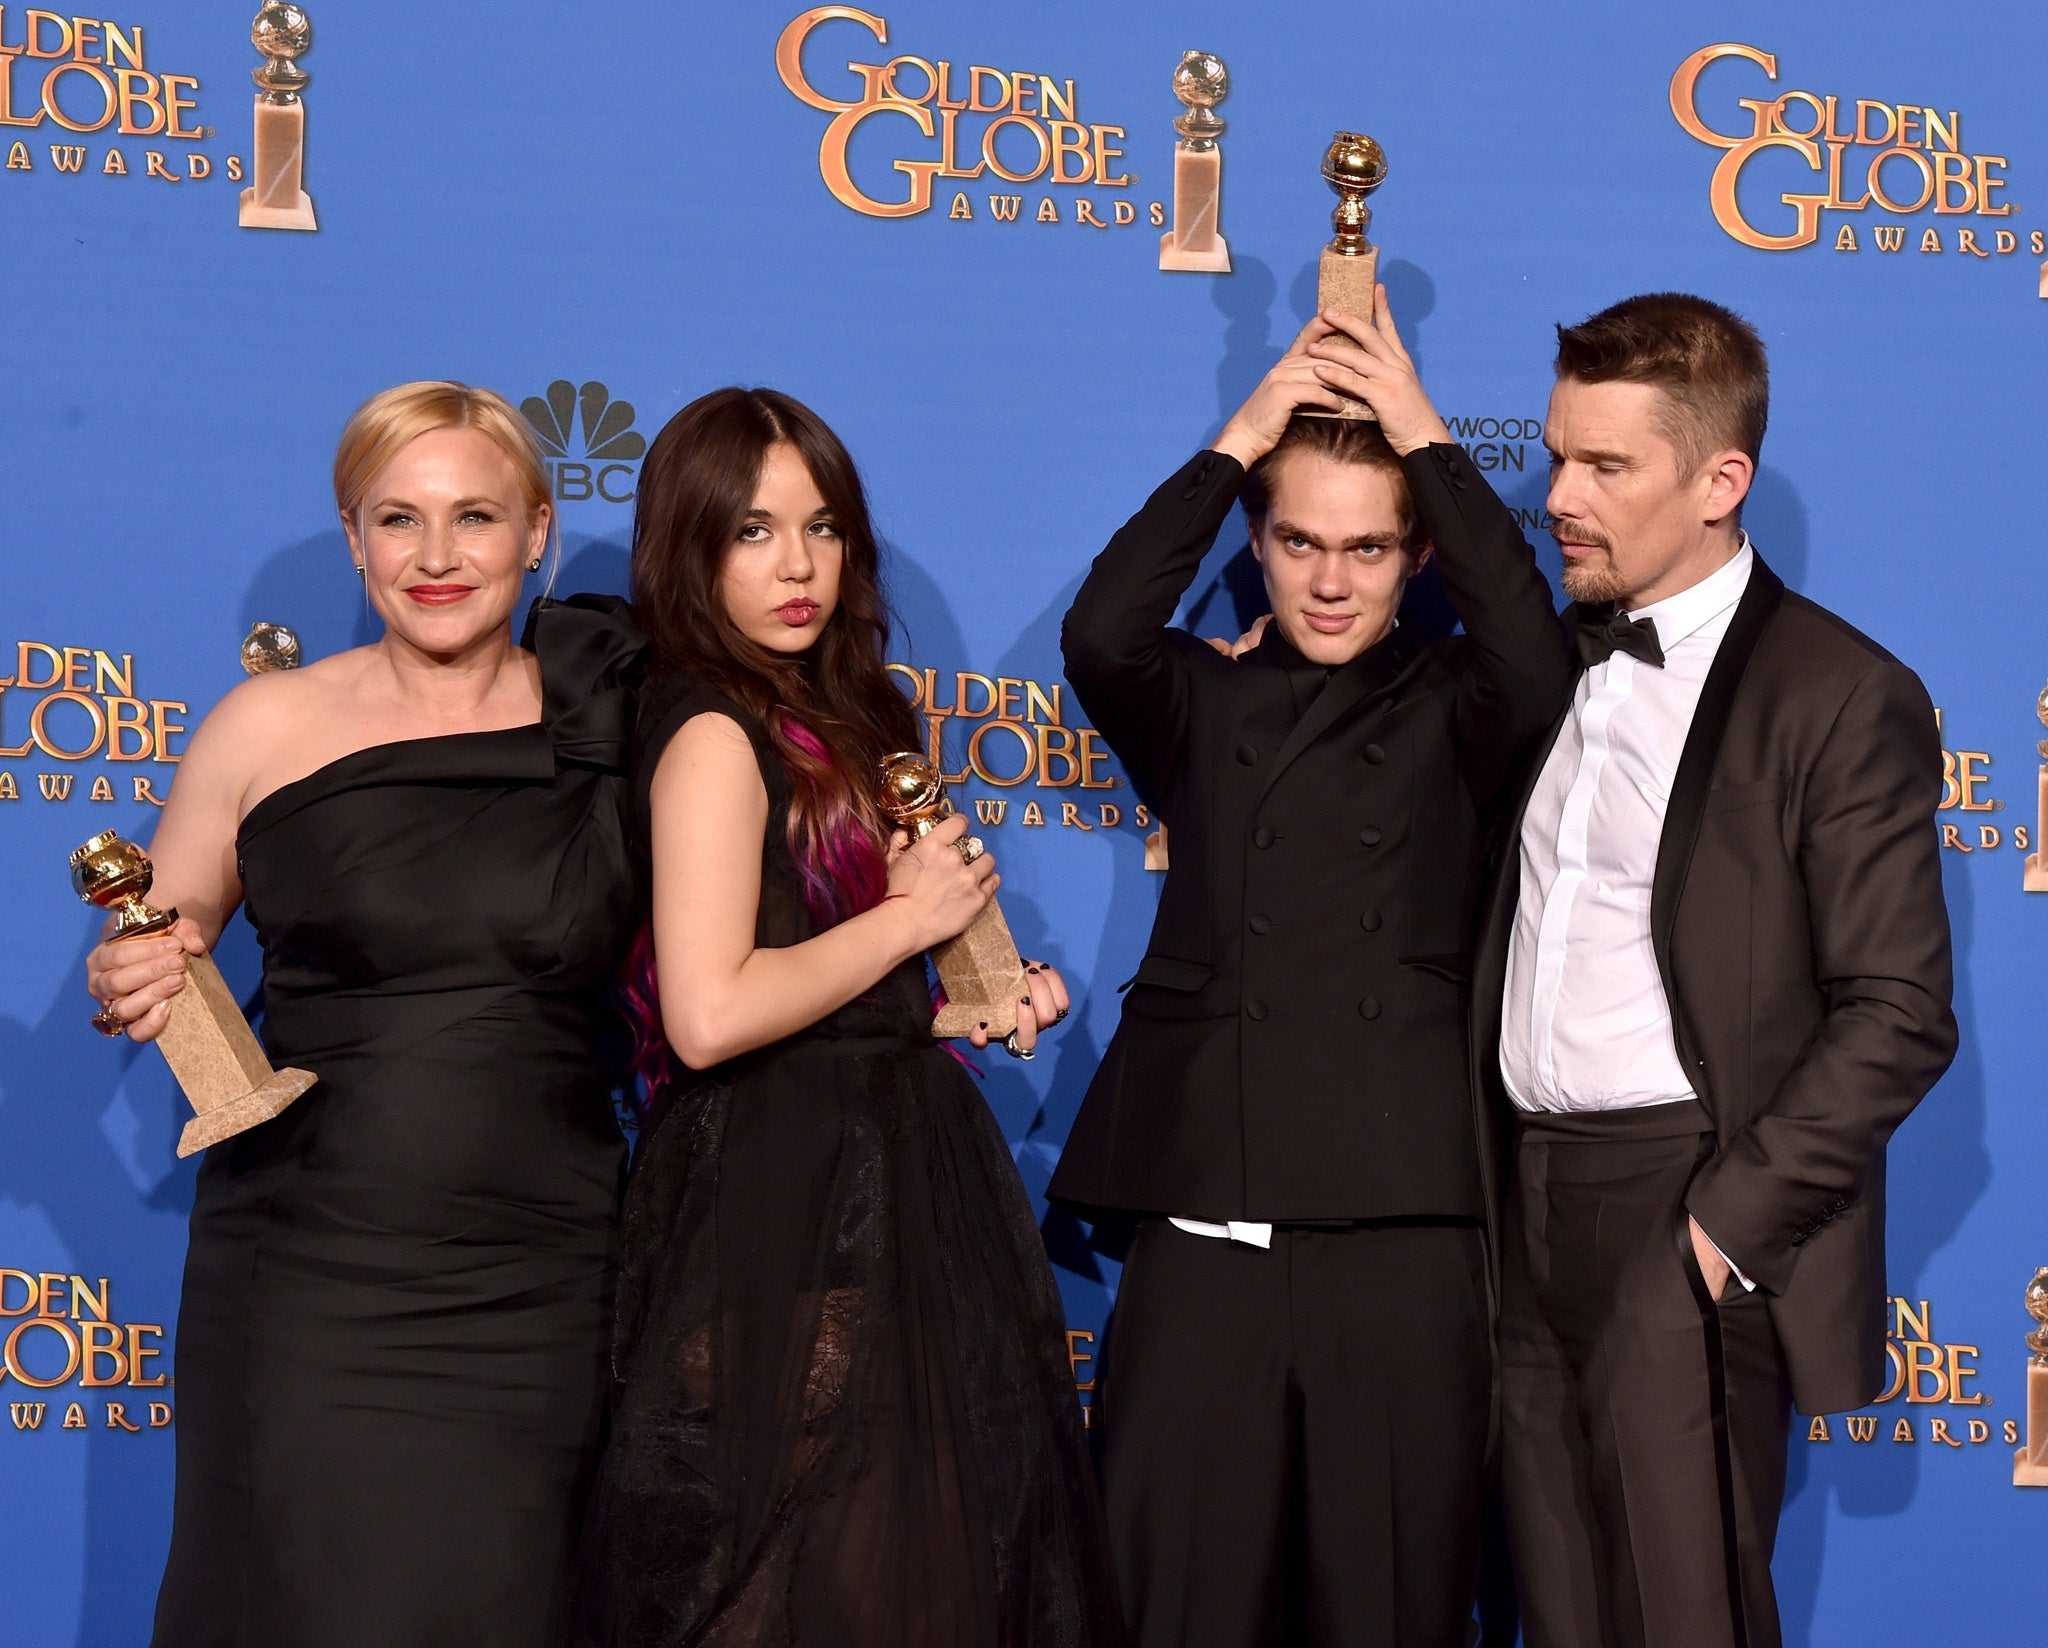 Actors Patricia Arquette, Lorelei Linklater, Ellar Coltrane, and Ethan Hawke, winners of Best Motion Picture - Drama for Boyhood, pose in the press room